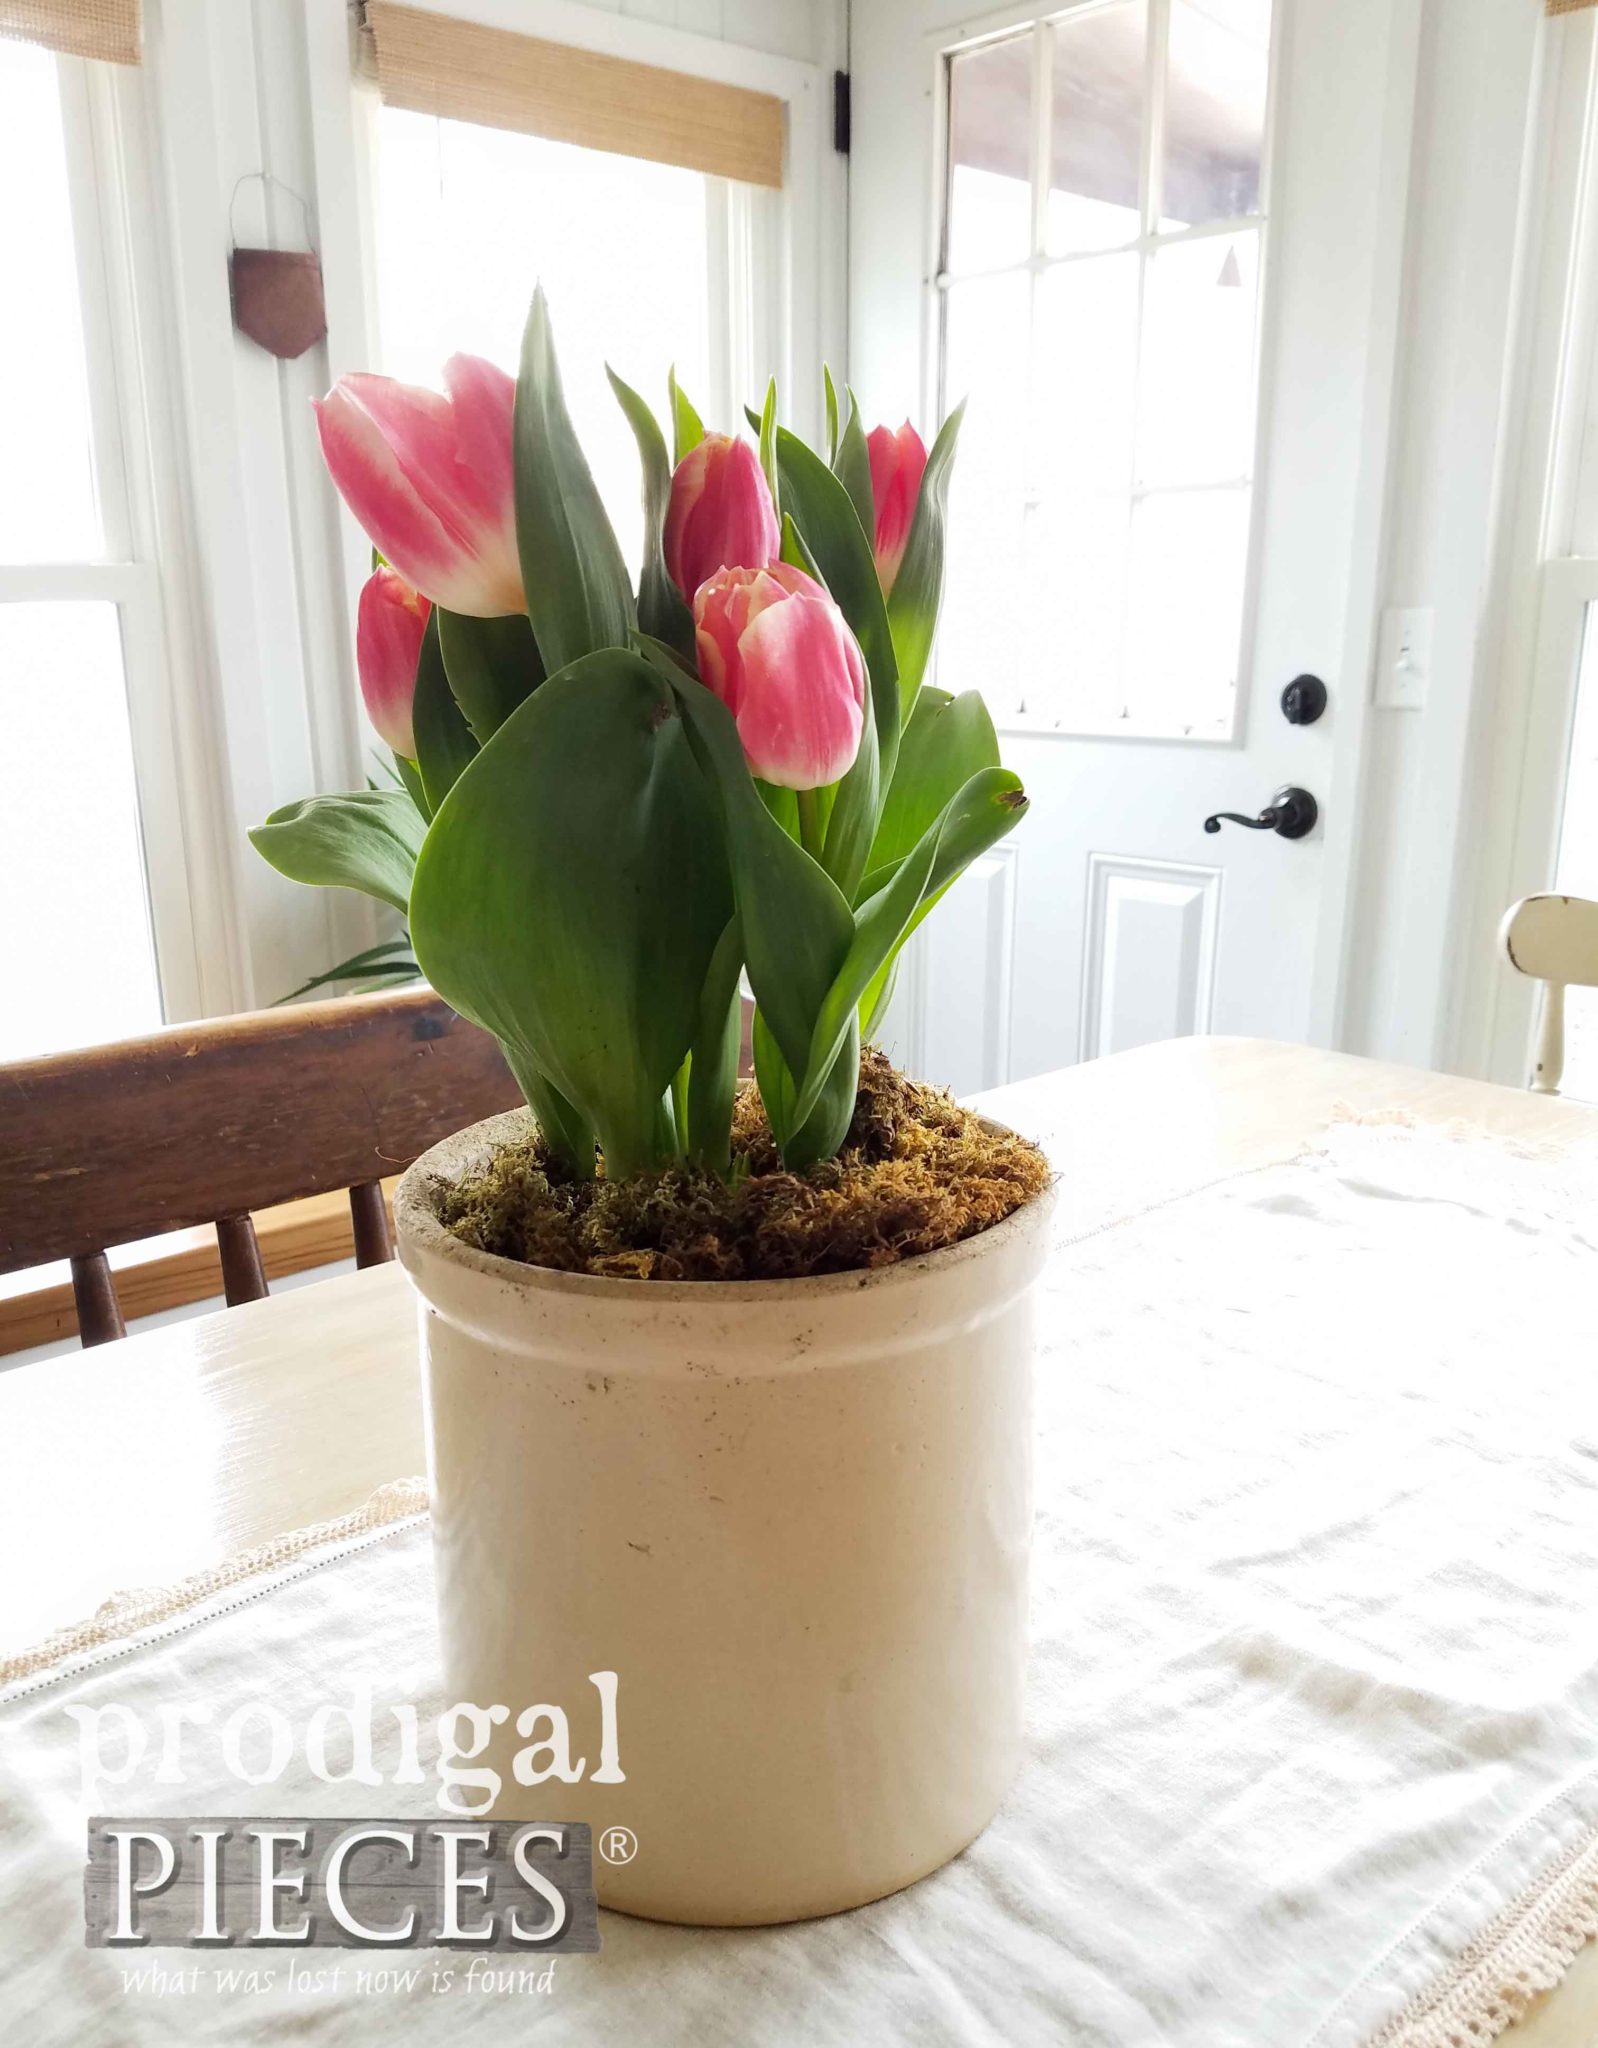 Antique Crock full of Tulip Blooms on Farmhouse Table by Larissa of Prodigal Pieces | prodigalpieces.com